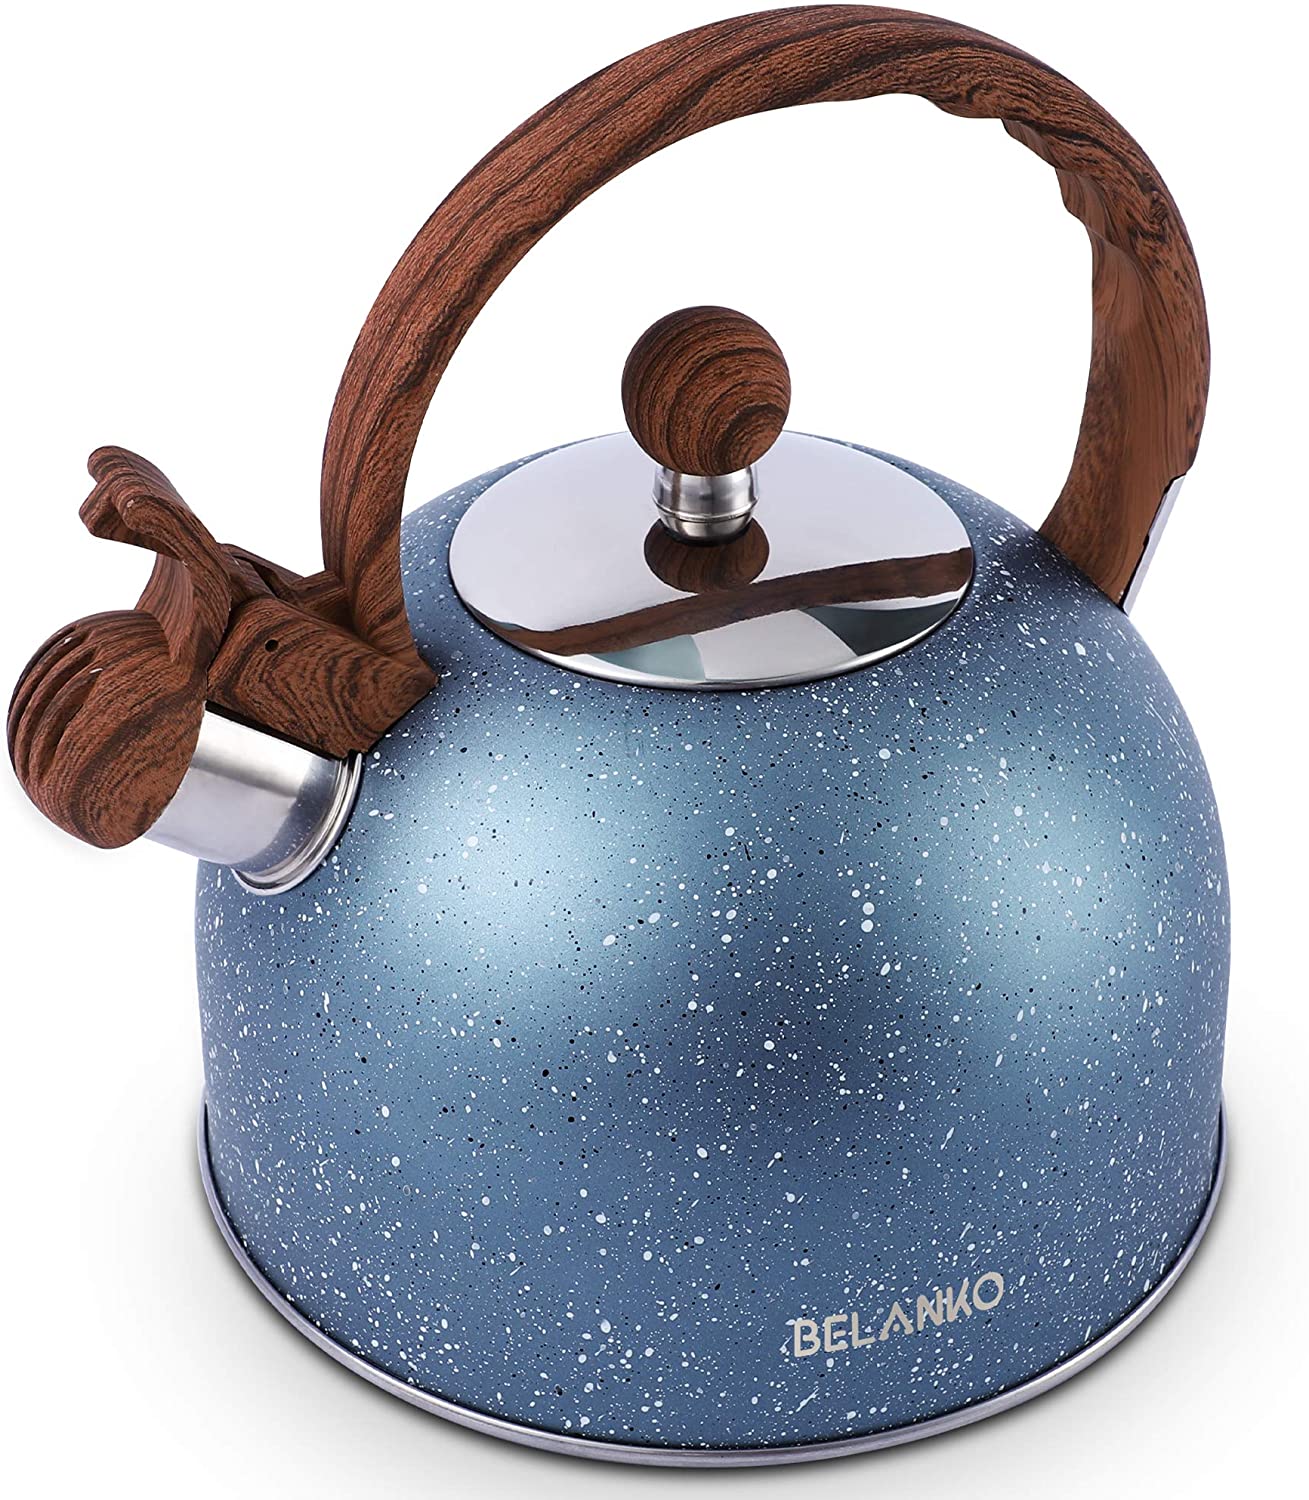 pebble white and blue print tea kettle with wooden handle